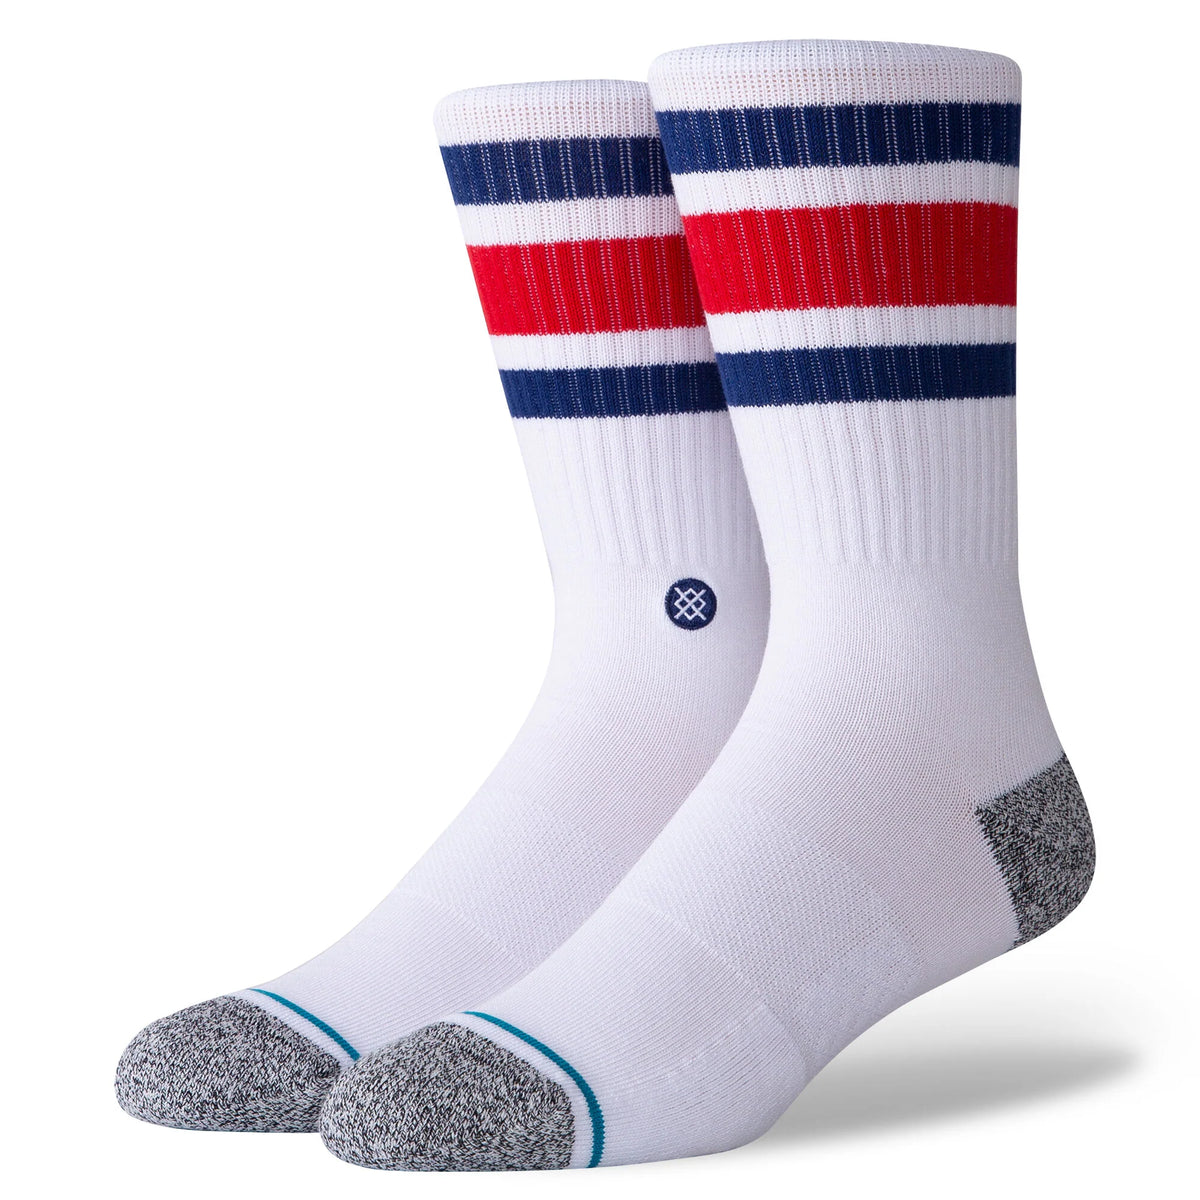 Stance THE BOYD Crew Socks - LARGE - MULTI - 3 PACK